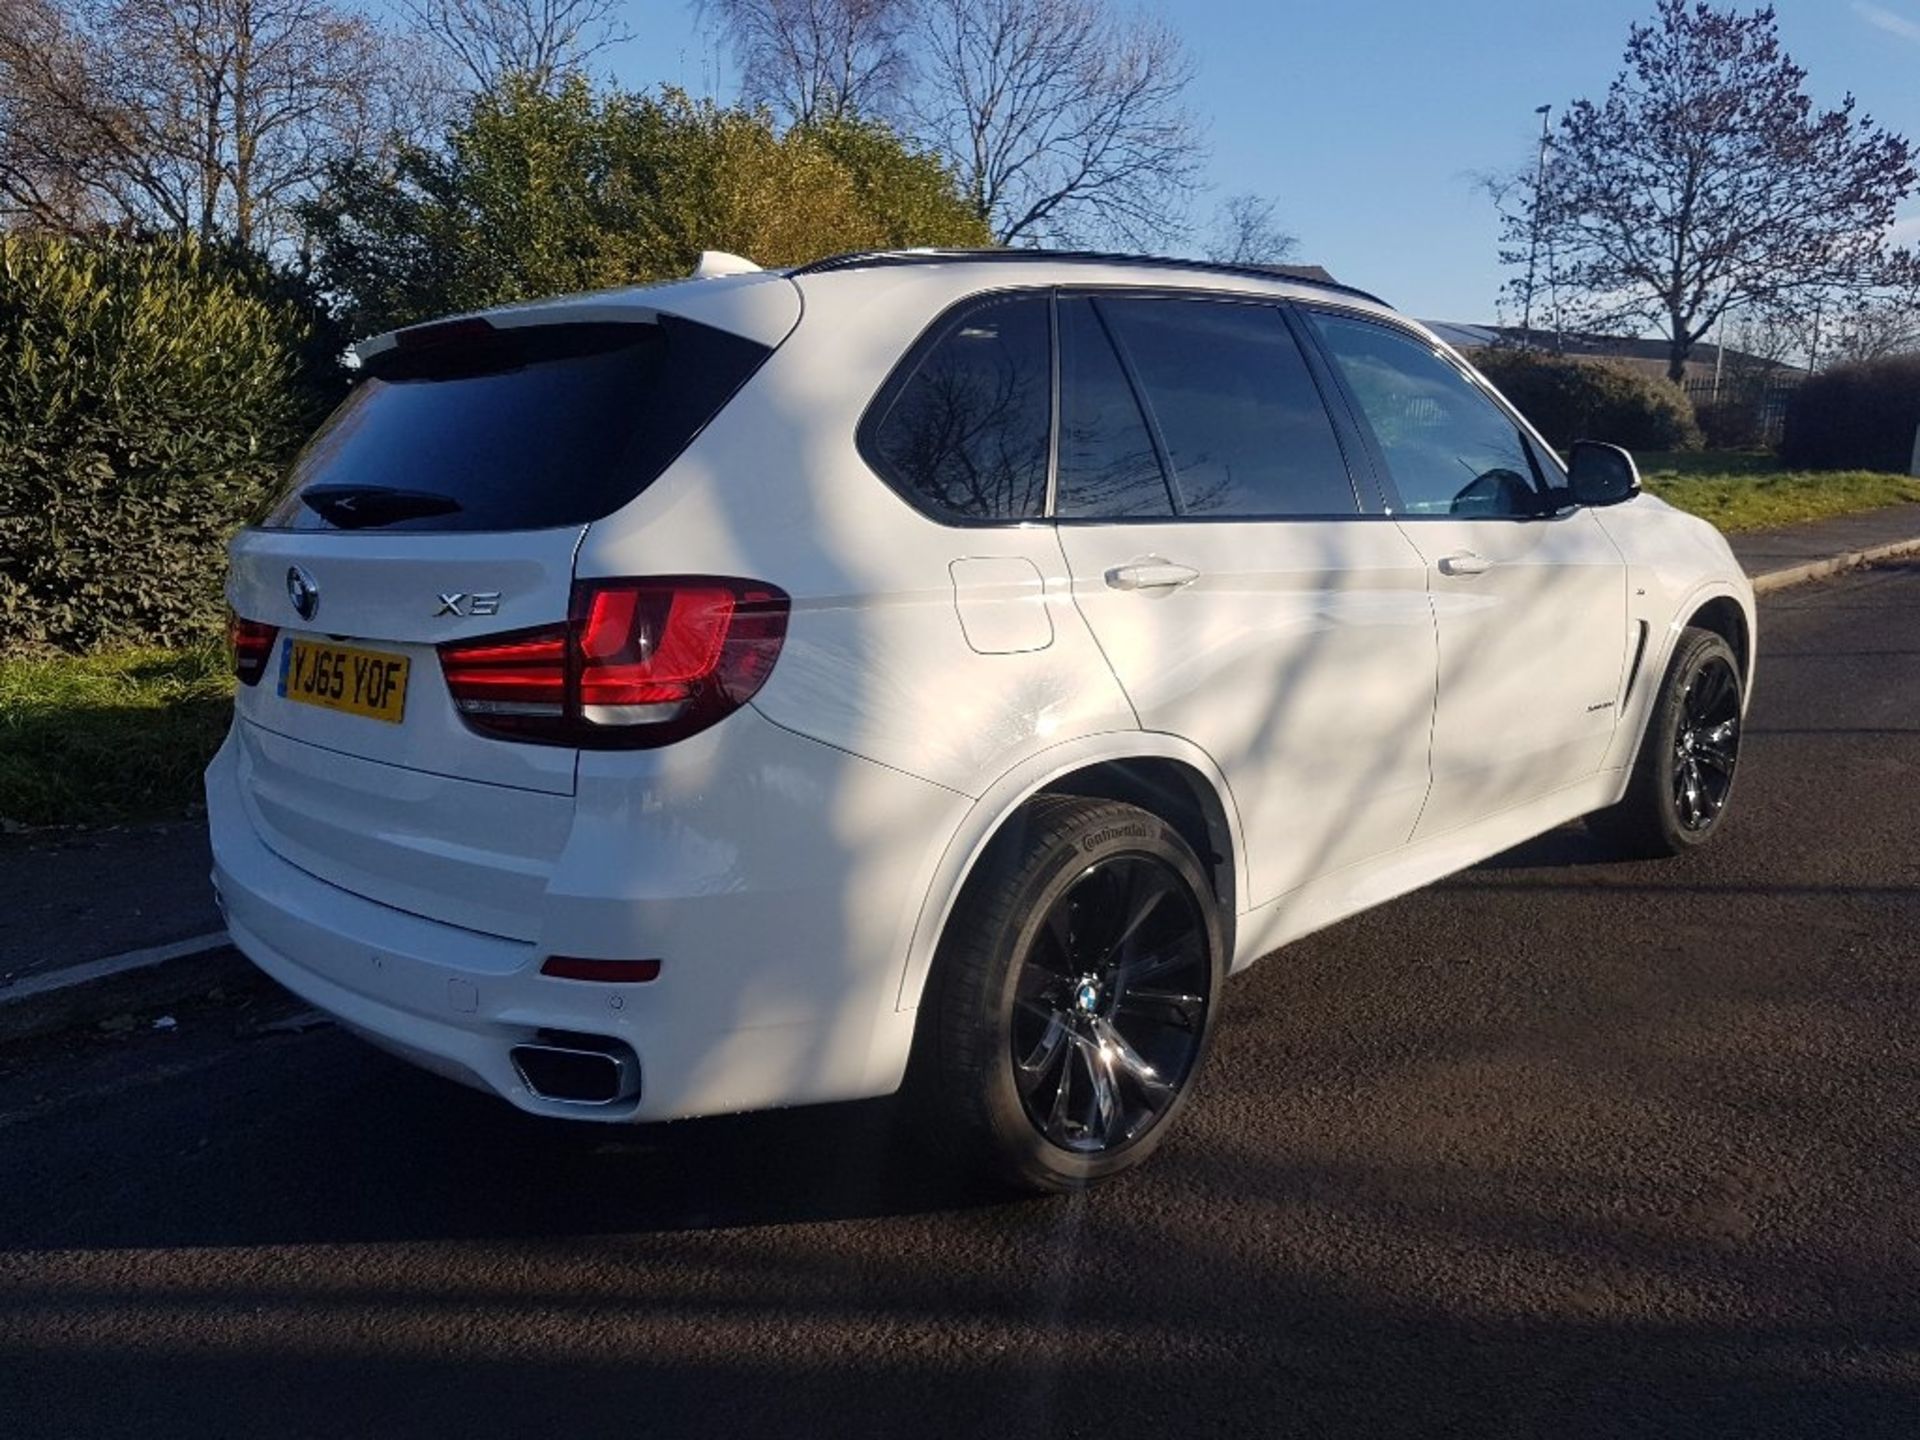 BMW, X5 40D M SPORT STEPTRONIC, 29.09.2015, YJ65 YOF, 3-0 LTR, DIESEL, AUTOMATIC, 5 DOOR SUV, 17,006 - Image 14 of 20